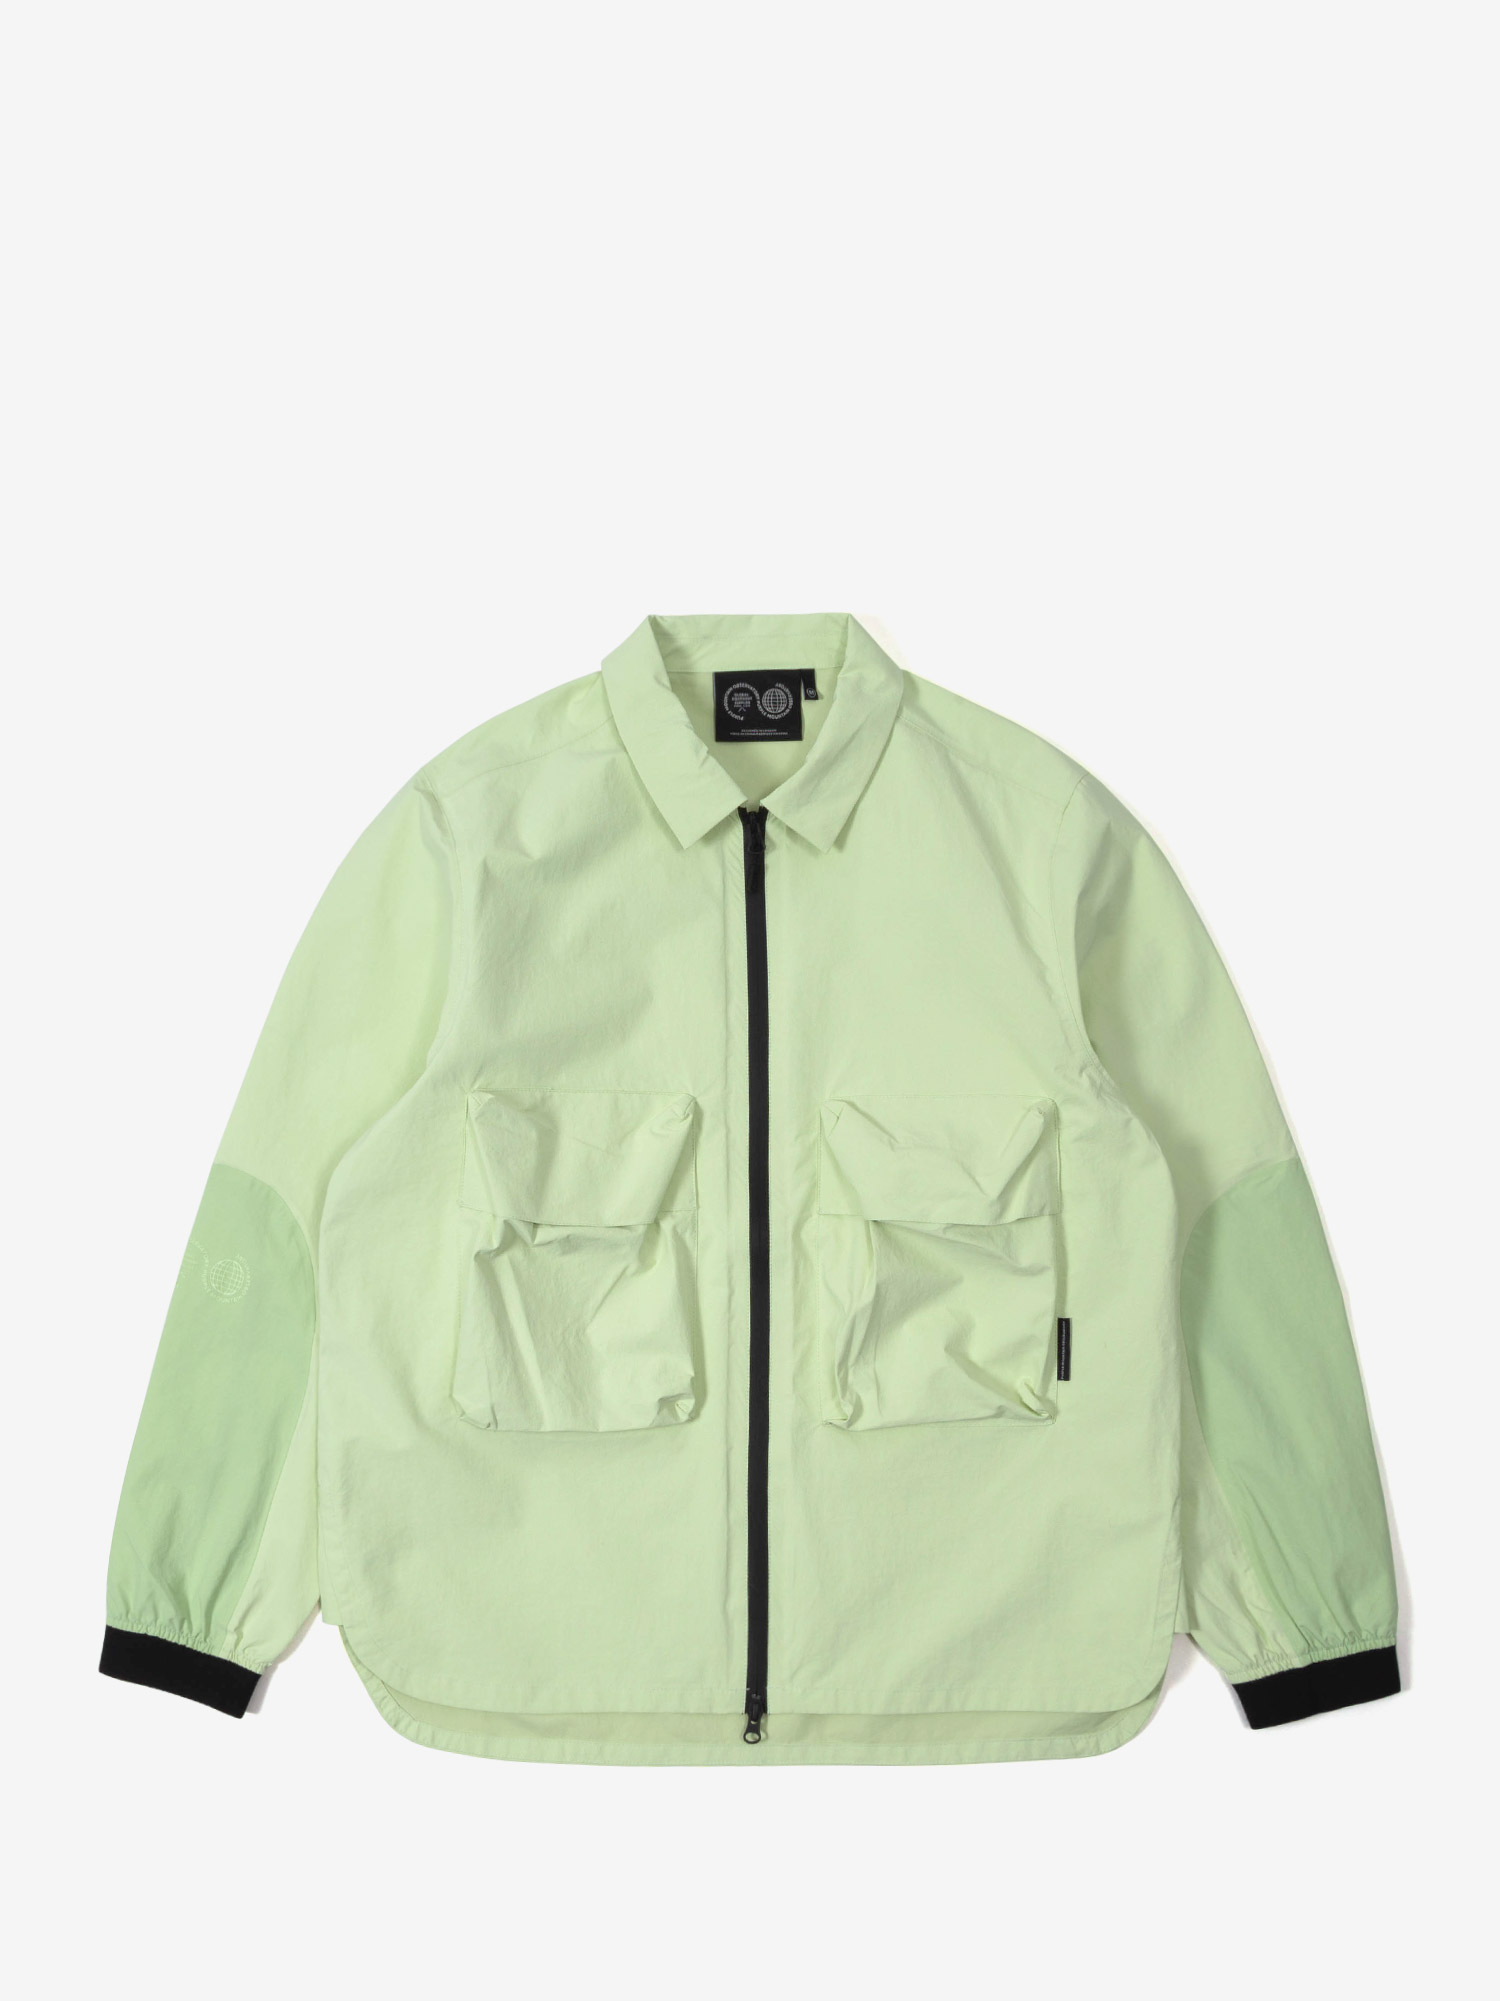 Featured image for “CLIMATE LIGHTWEIGHT JACKET IN LIME CREAM”